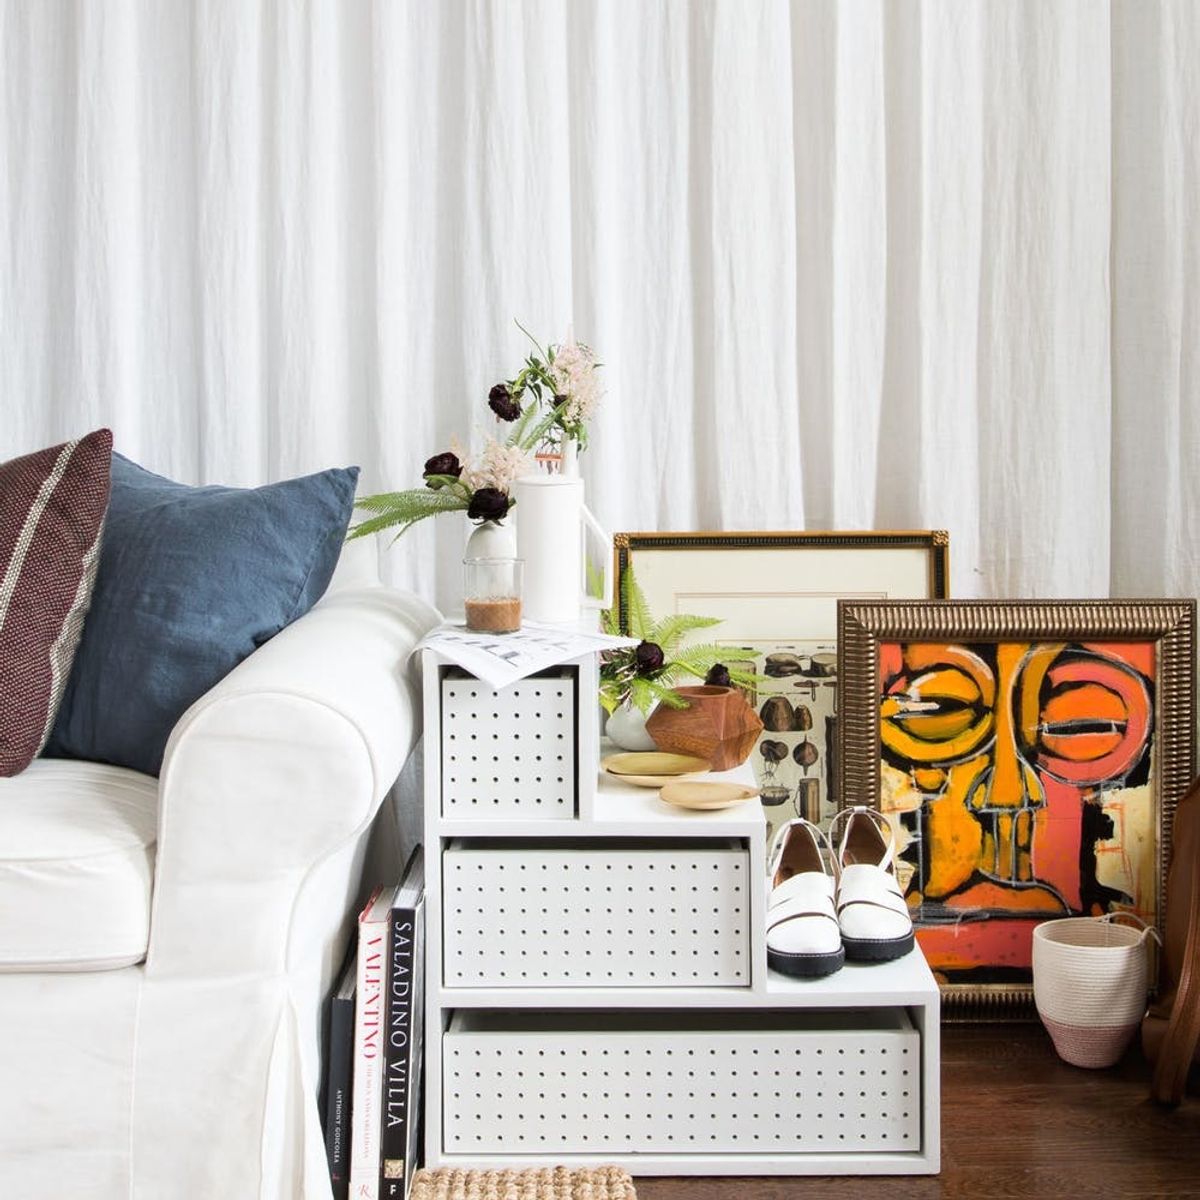 Shop Designer-Approved Decor With the Homepolish x SPRING Collab